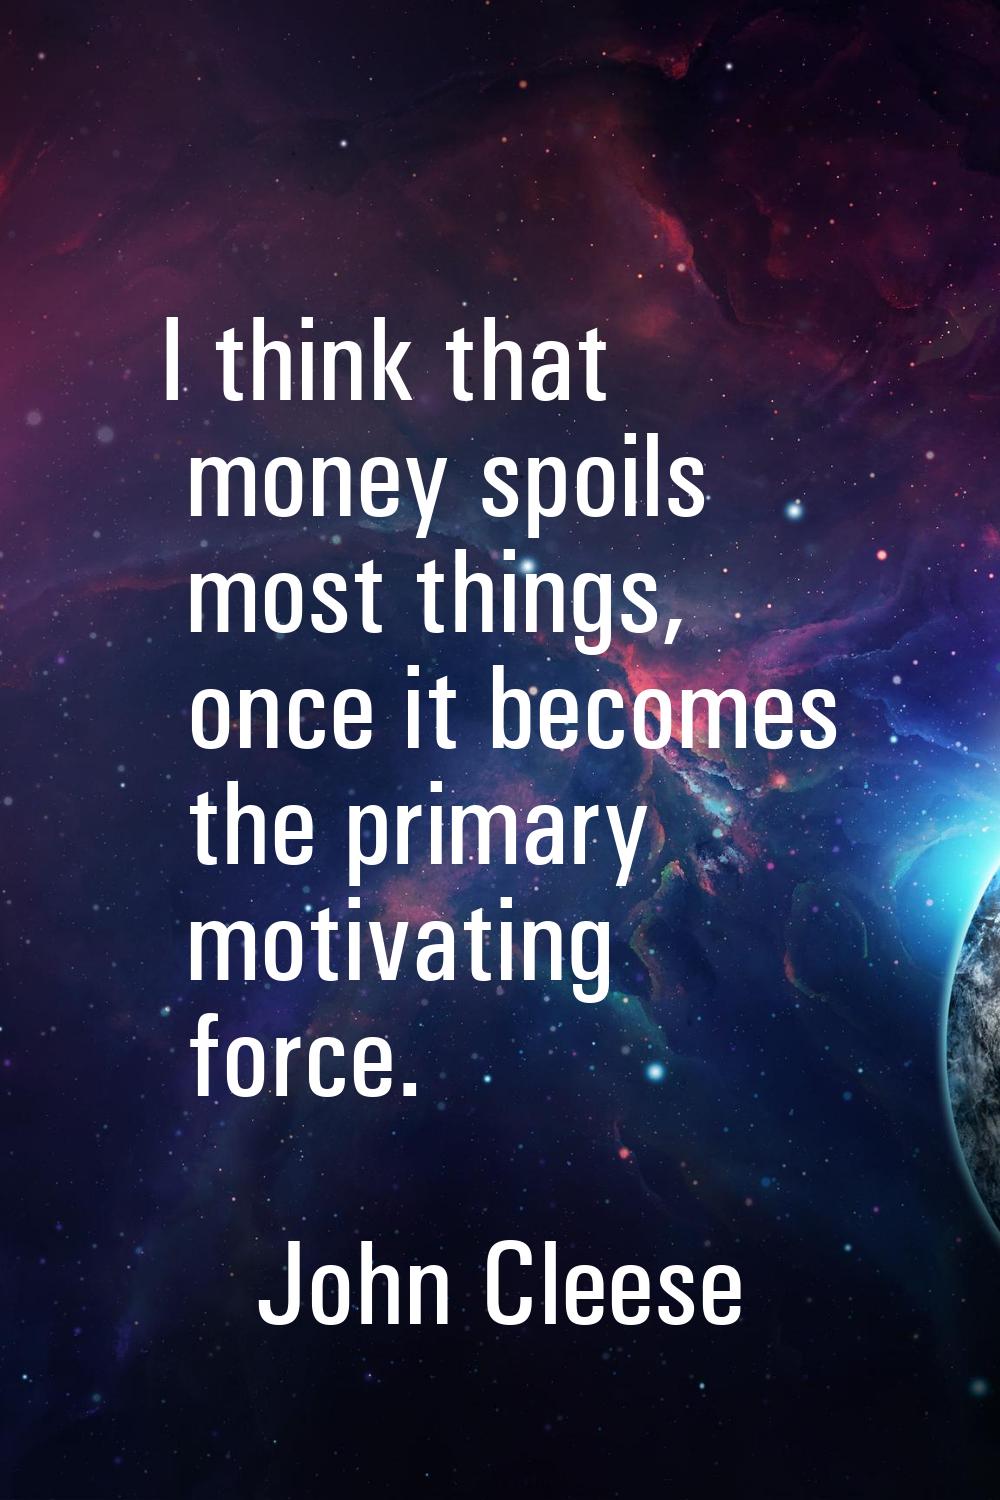 I think that money spoils most things, once it becomes the primary motivating force.